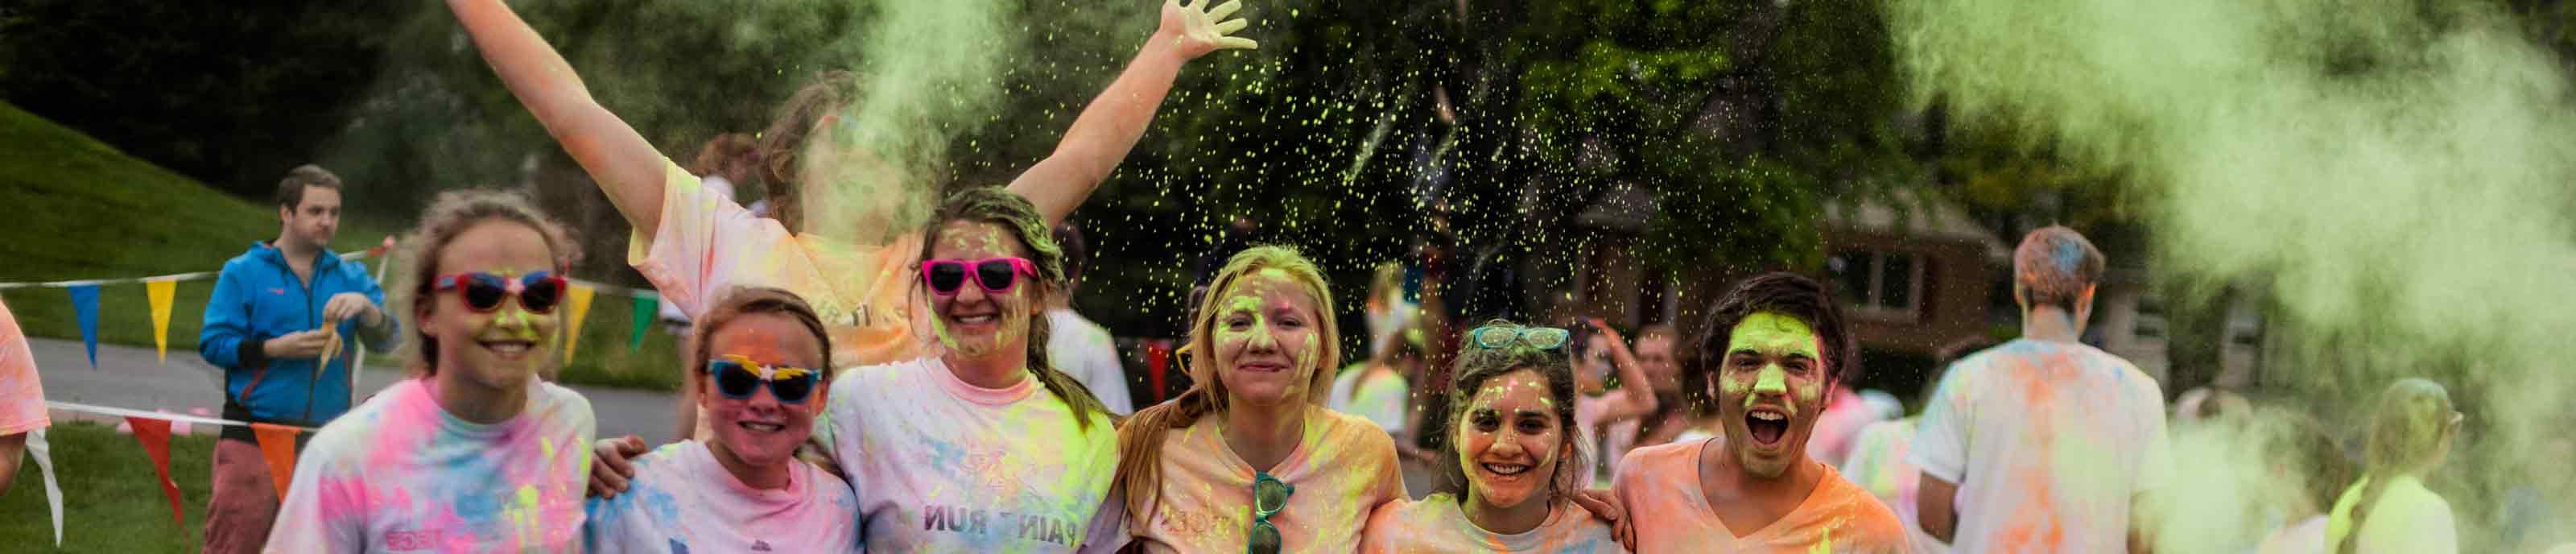 Students having fun in clouds of brightly-colored powder at the Color Run